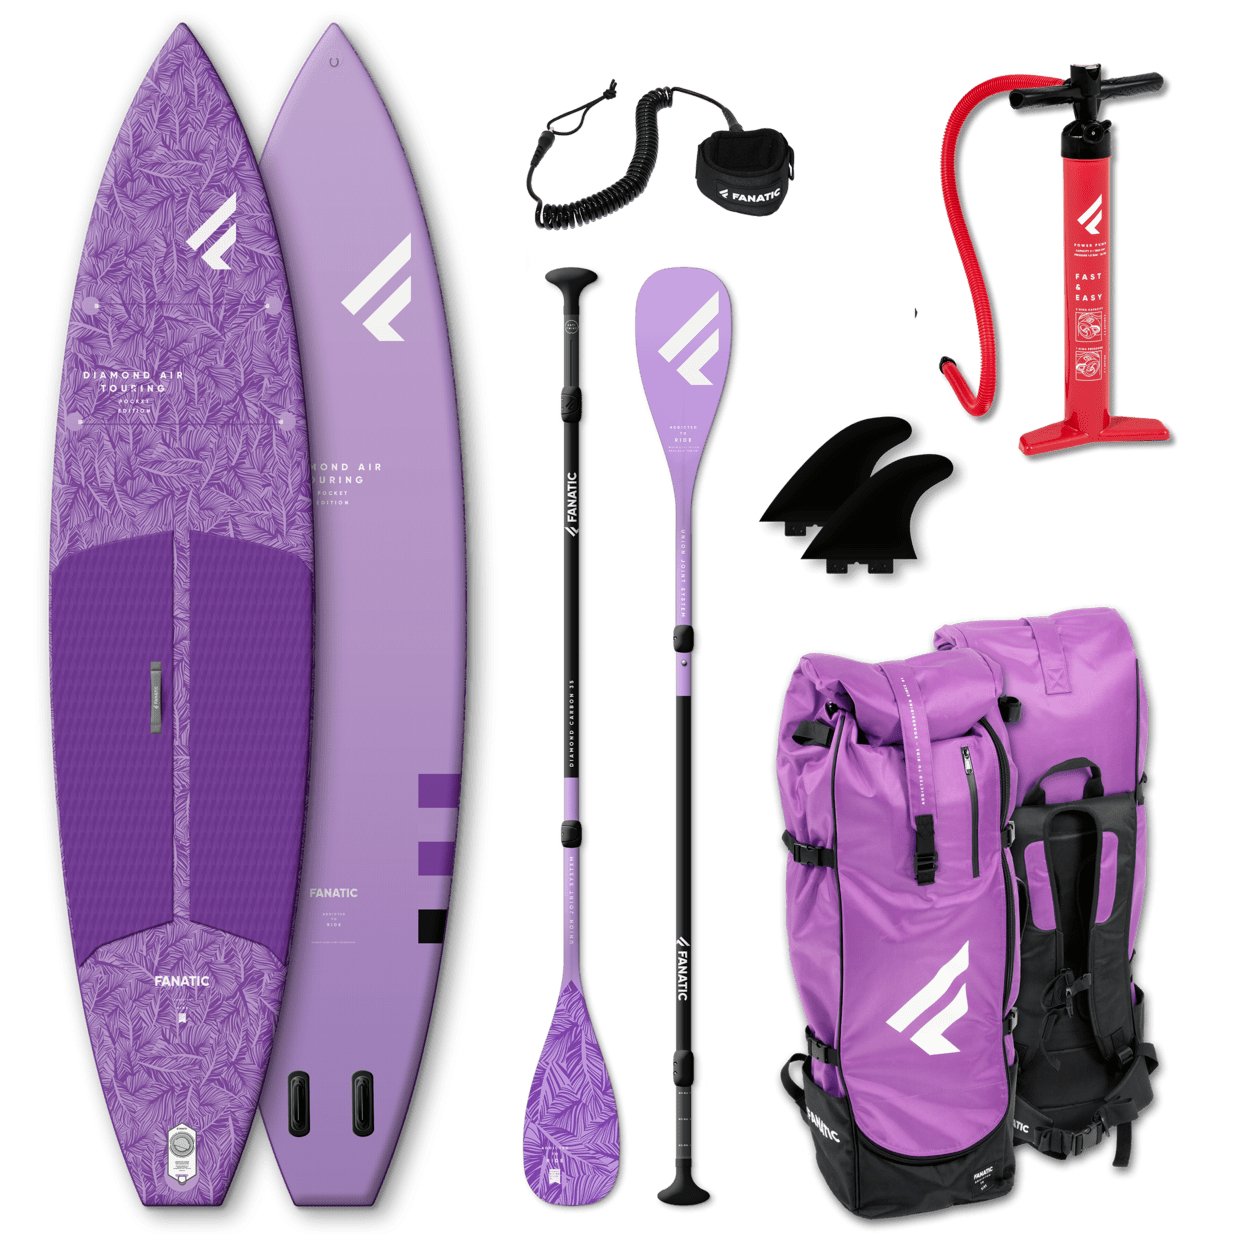 Fanatic Package Diamond Air Touring Pocket 2022 iSUP Paddleboard - Worthing Watersports - 9010583015767 - iSUP Packages - Fanatic SUP